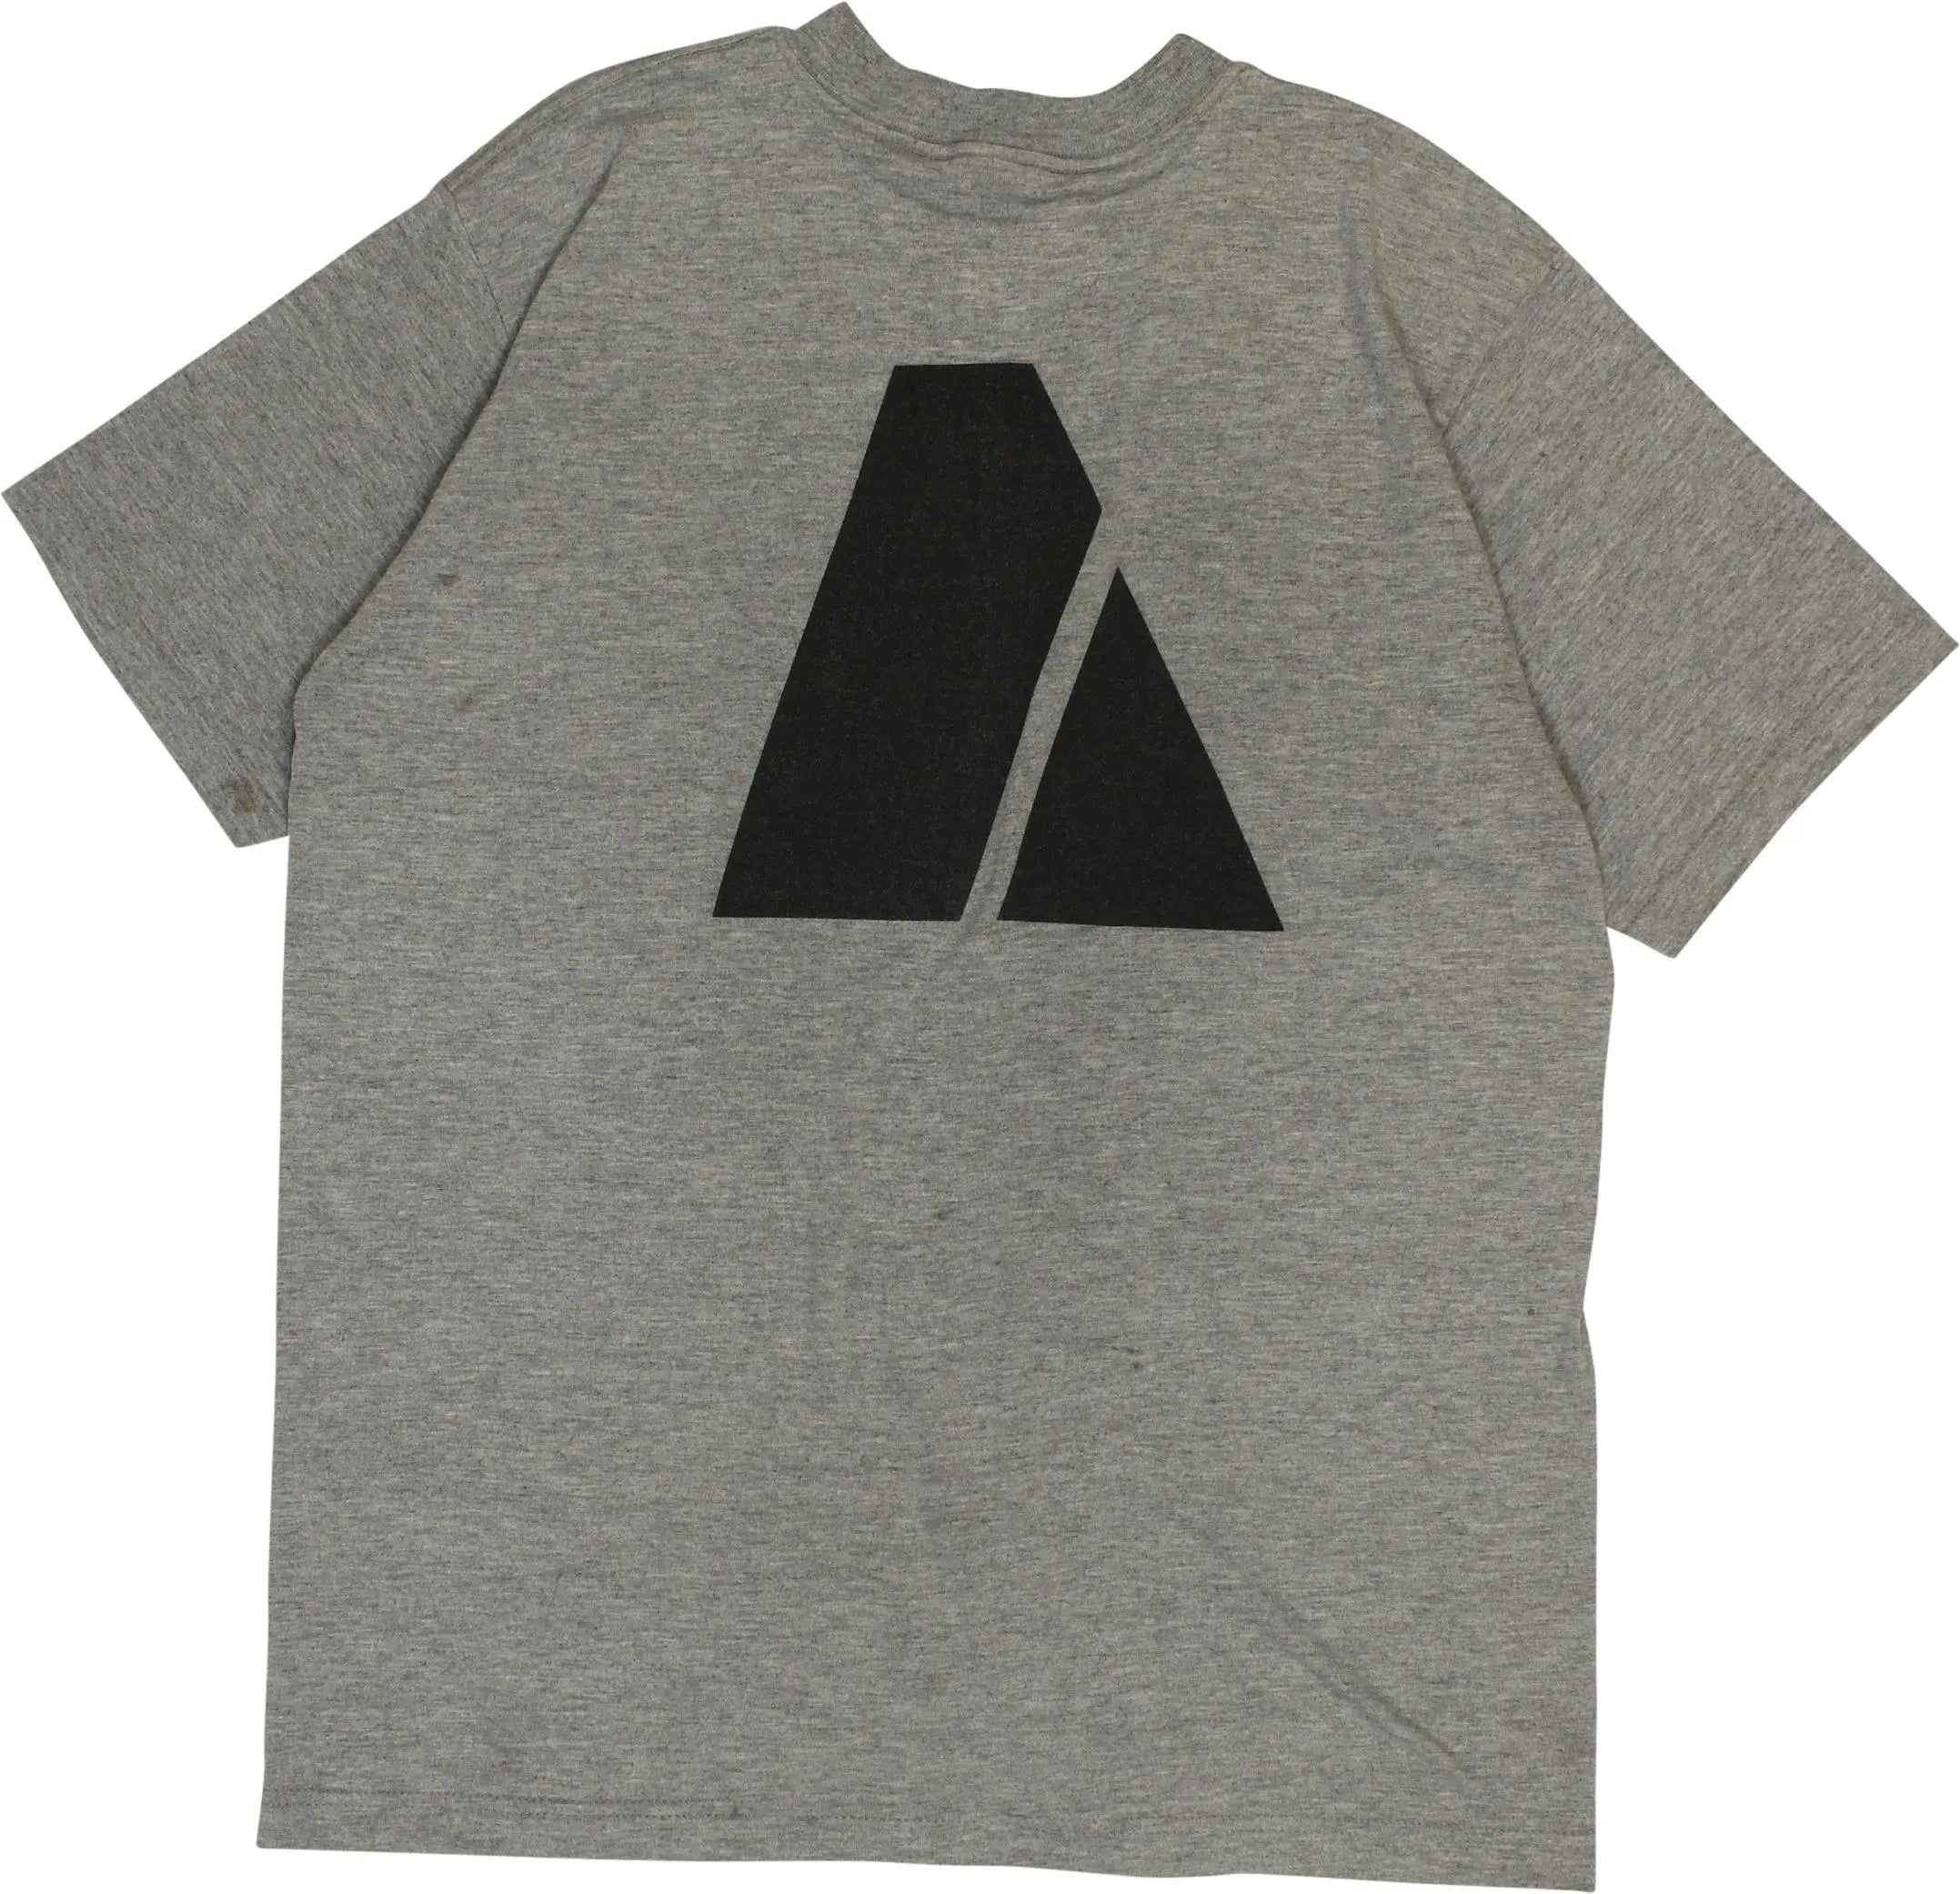 Unknown - 'ARMY' T-shirt- ThriftTale.com - Vintage and second handclothing